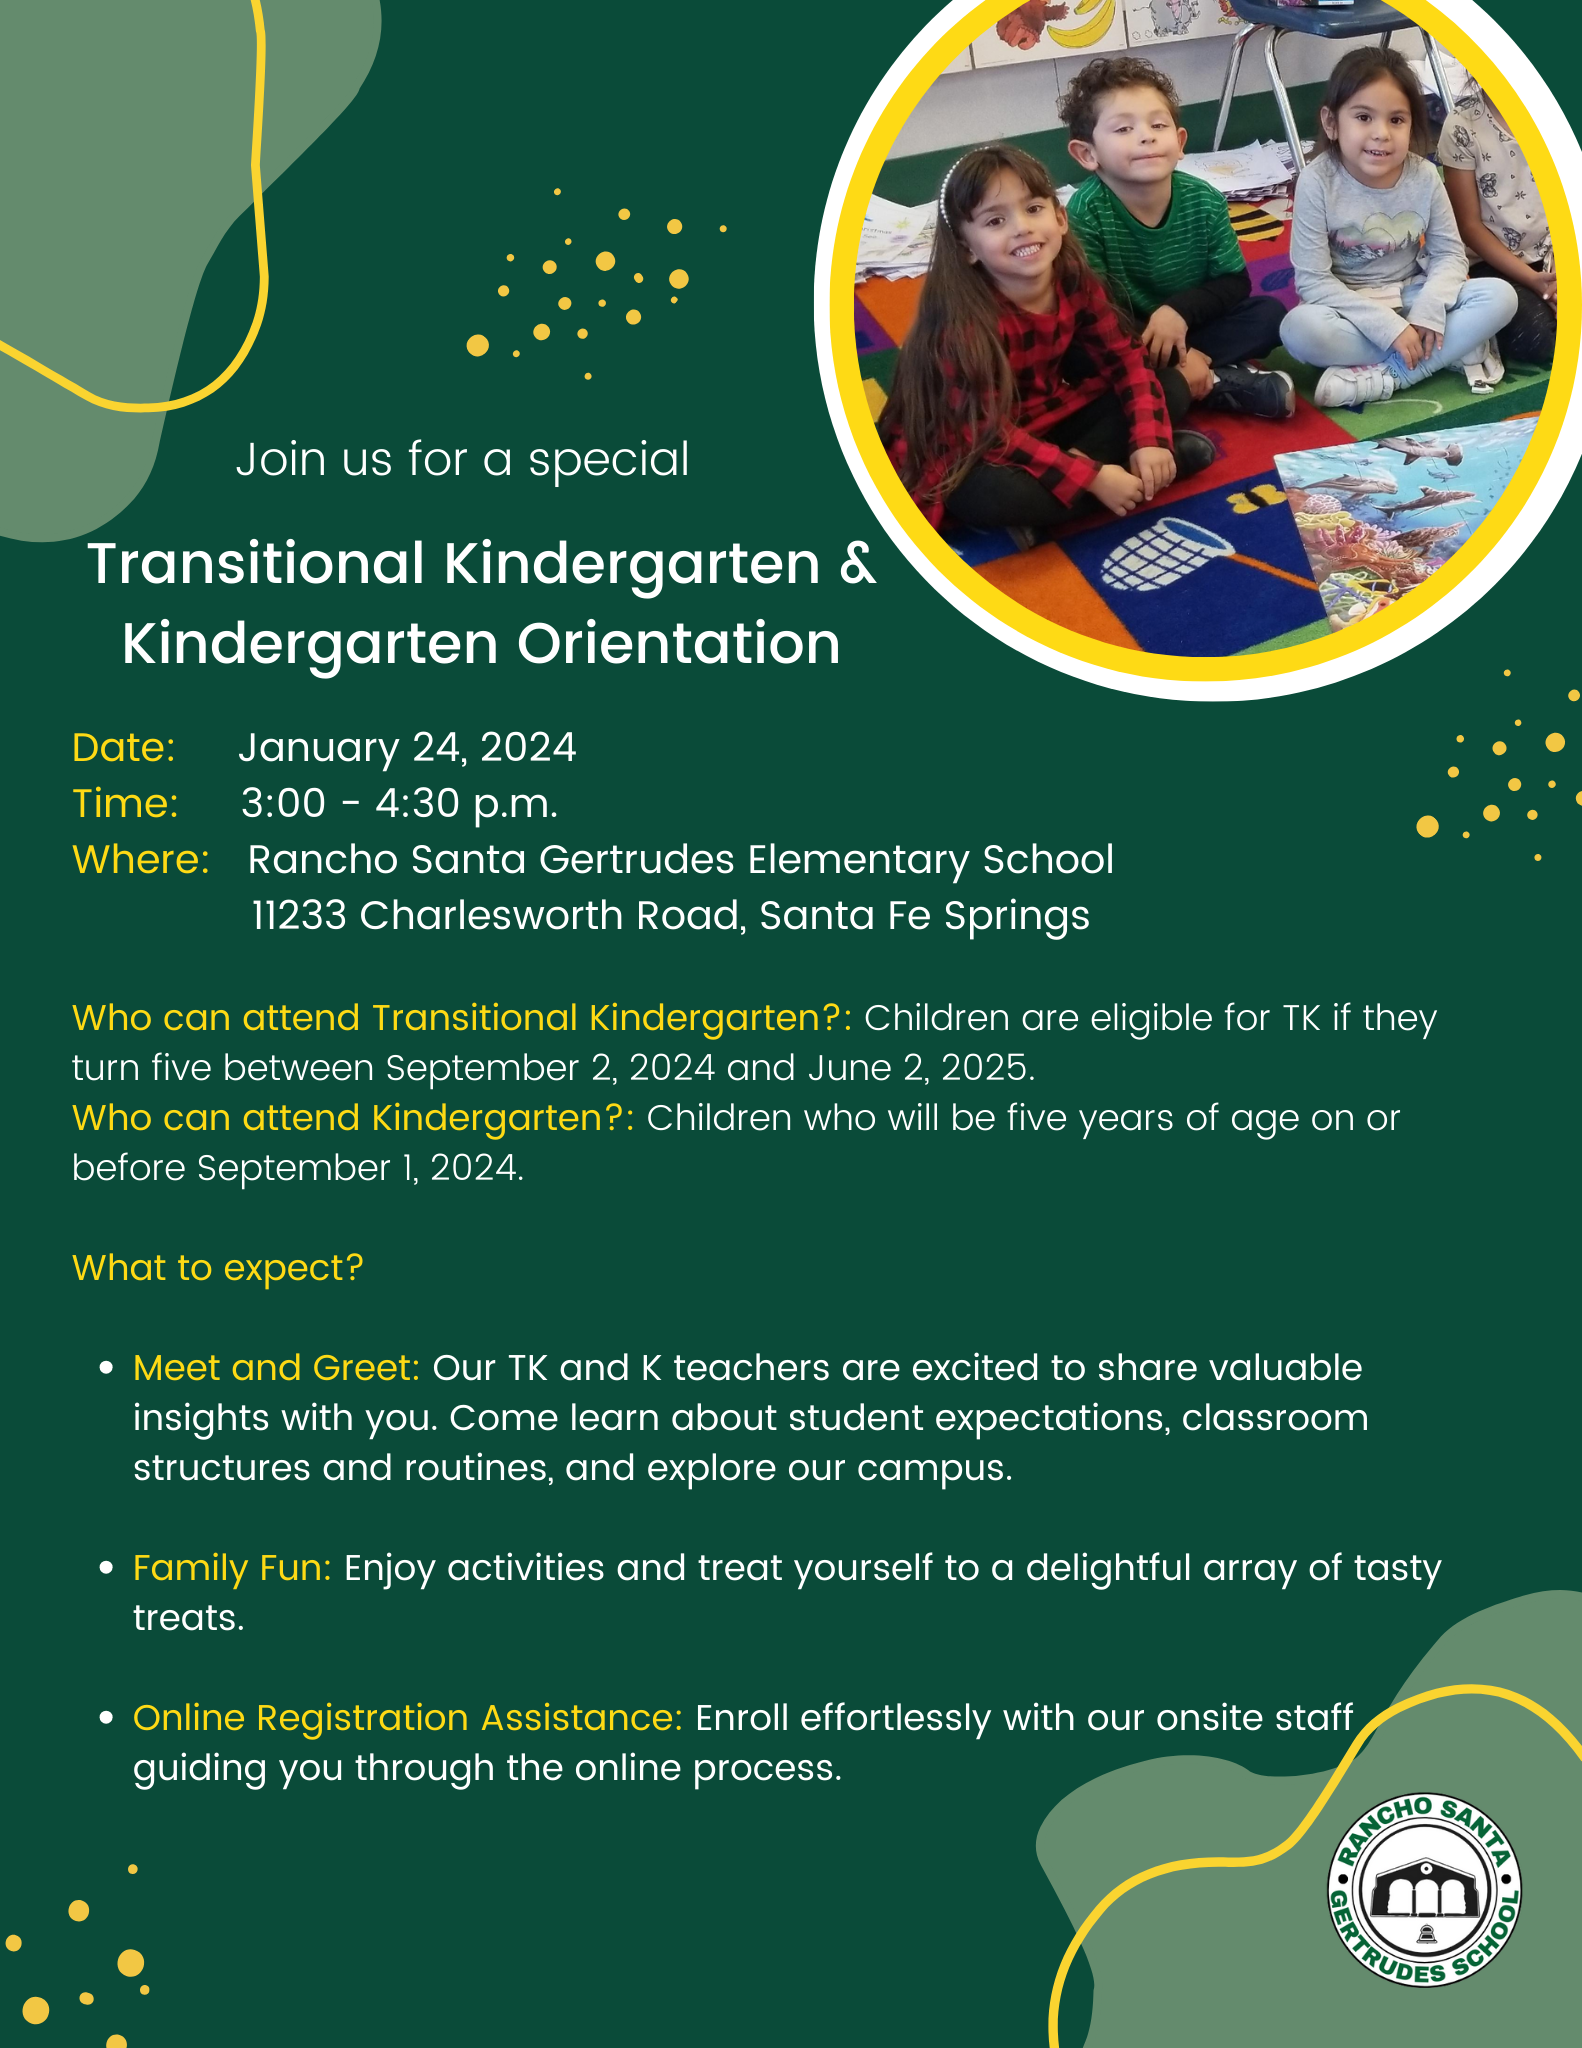 The image is a flyer for a Transitional Kindergarten & Kindergarten Orientation event. It features a turquoise background with orange and yellow circular patterns, and at the center, there is a photograph of three young children sitting on the floor, smiling at the camera, with educational toys and puzzles around them.